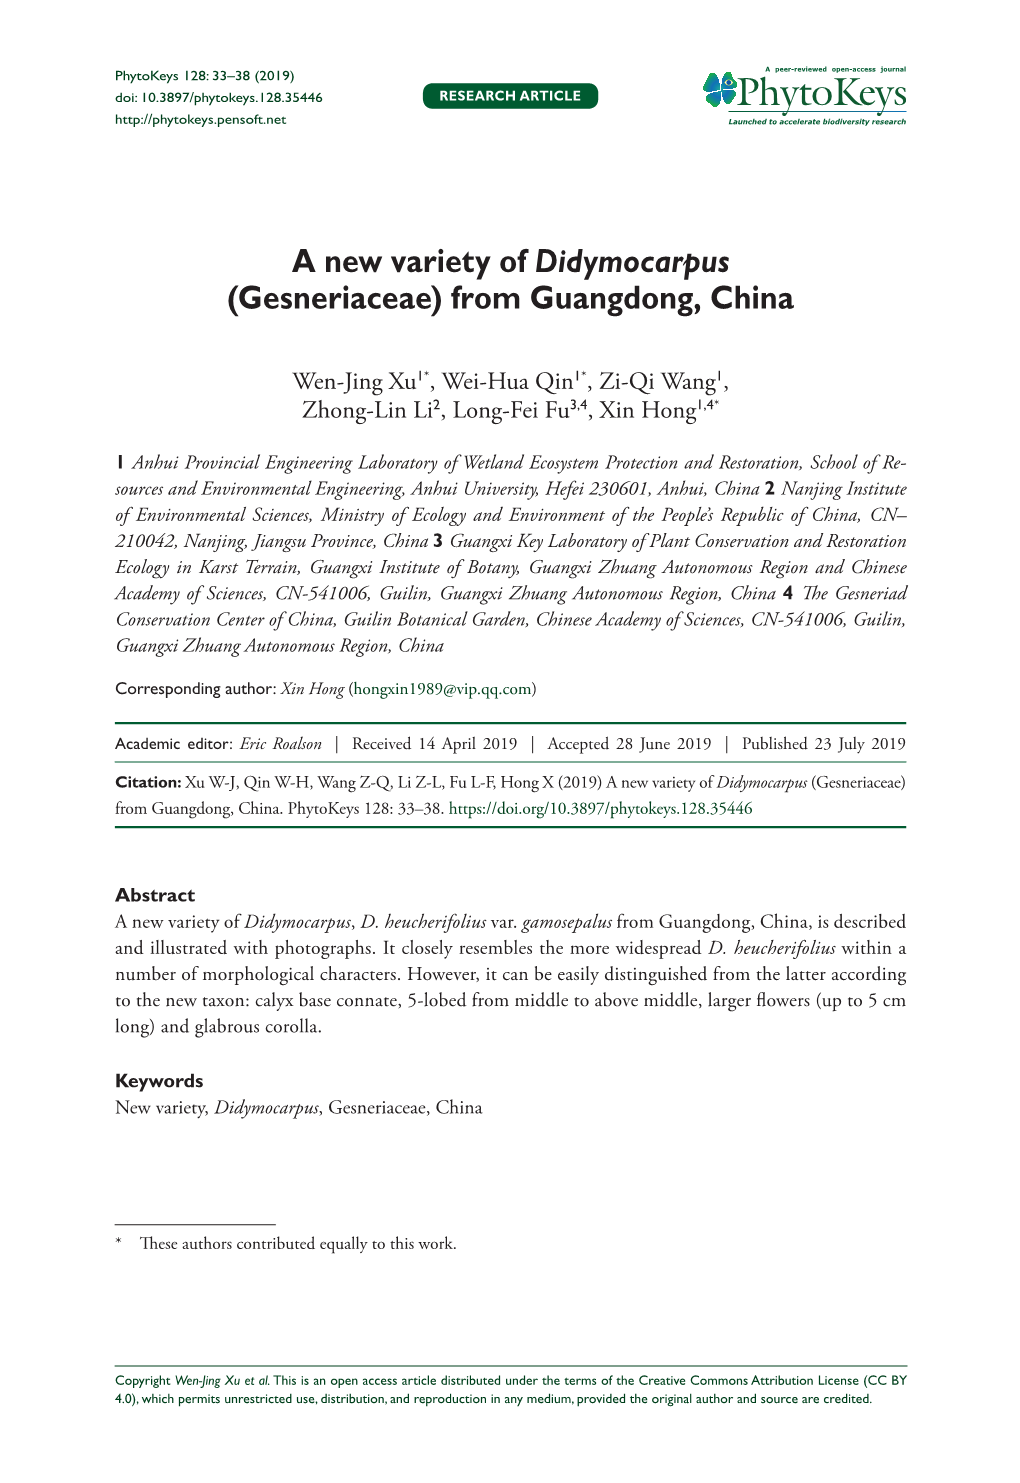 A New Variety of Didymocarpus (Gesneriaceae) from Guangdong, China